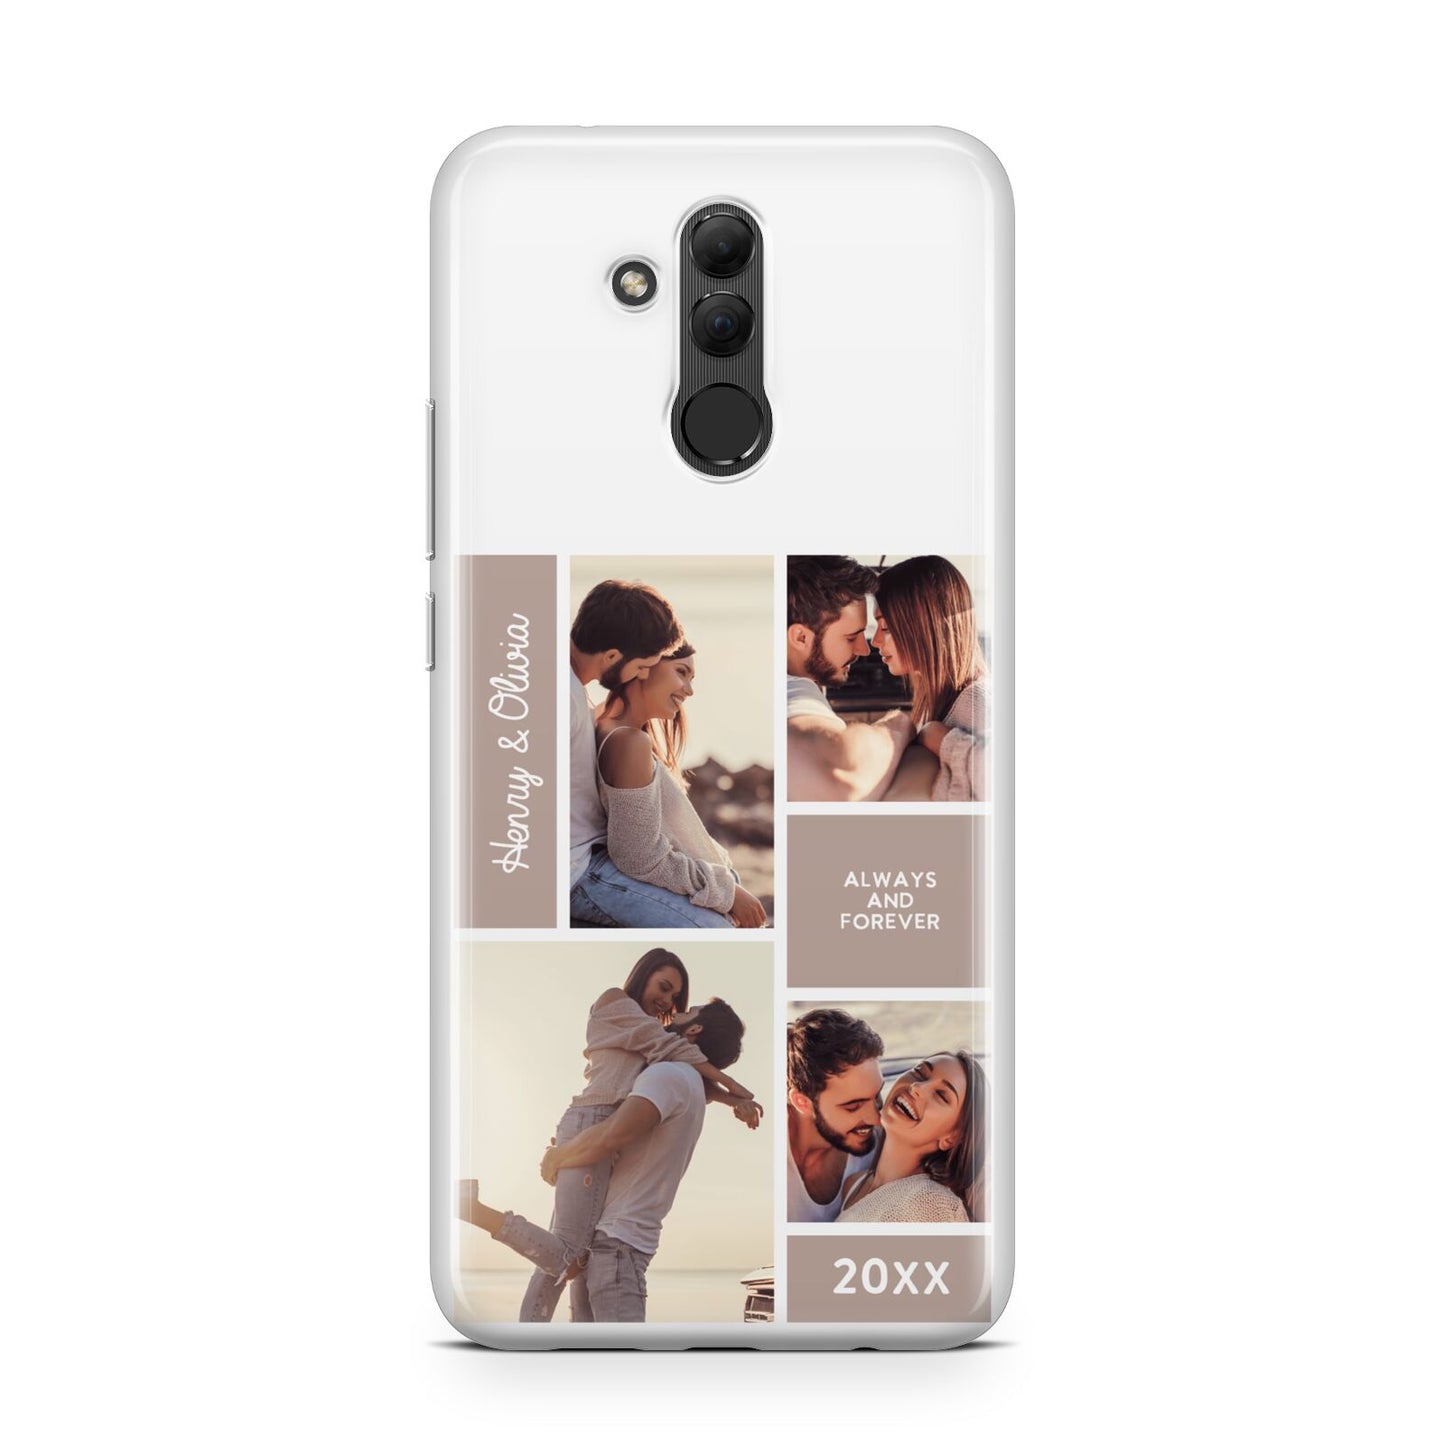 Couples Valentine Photo Collage Personalised Huawei Mate 20 Lite